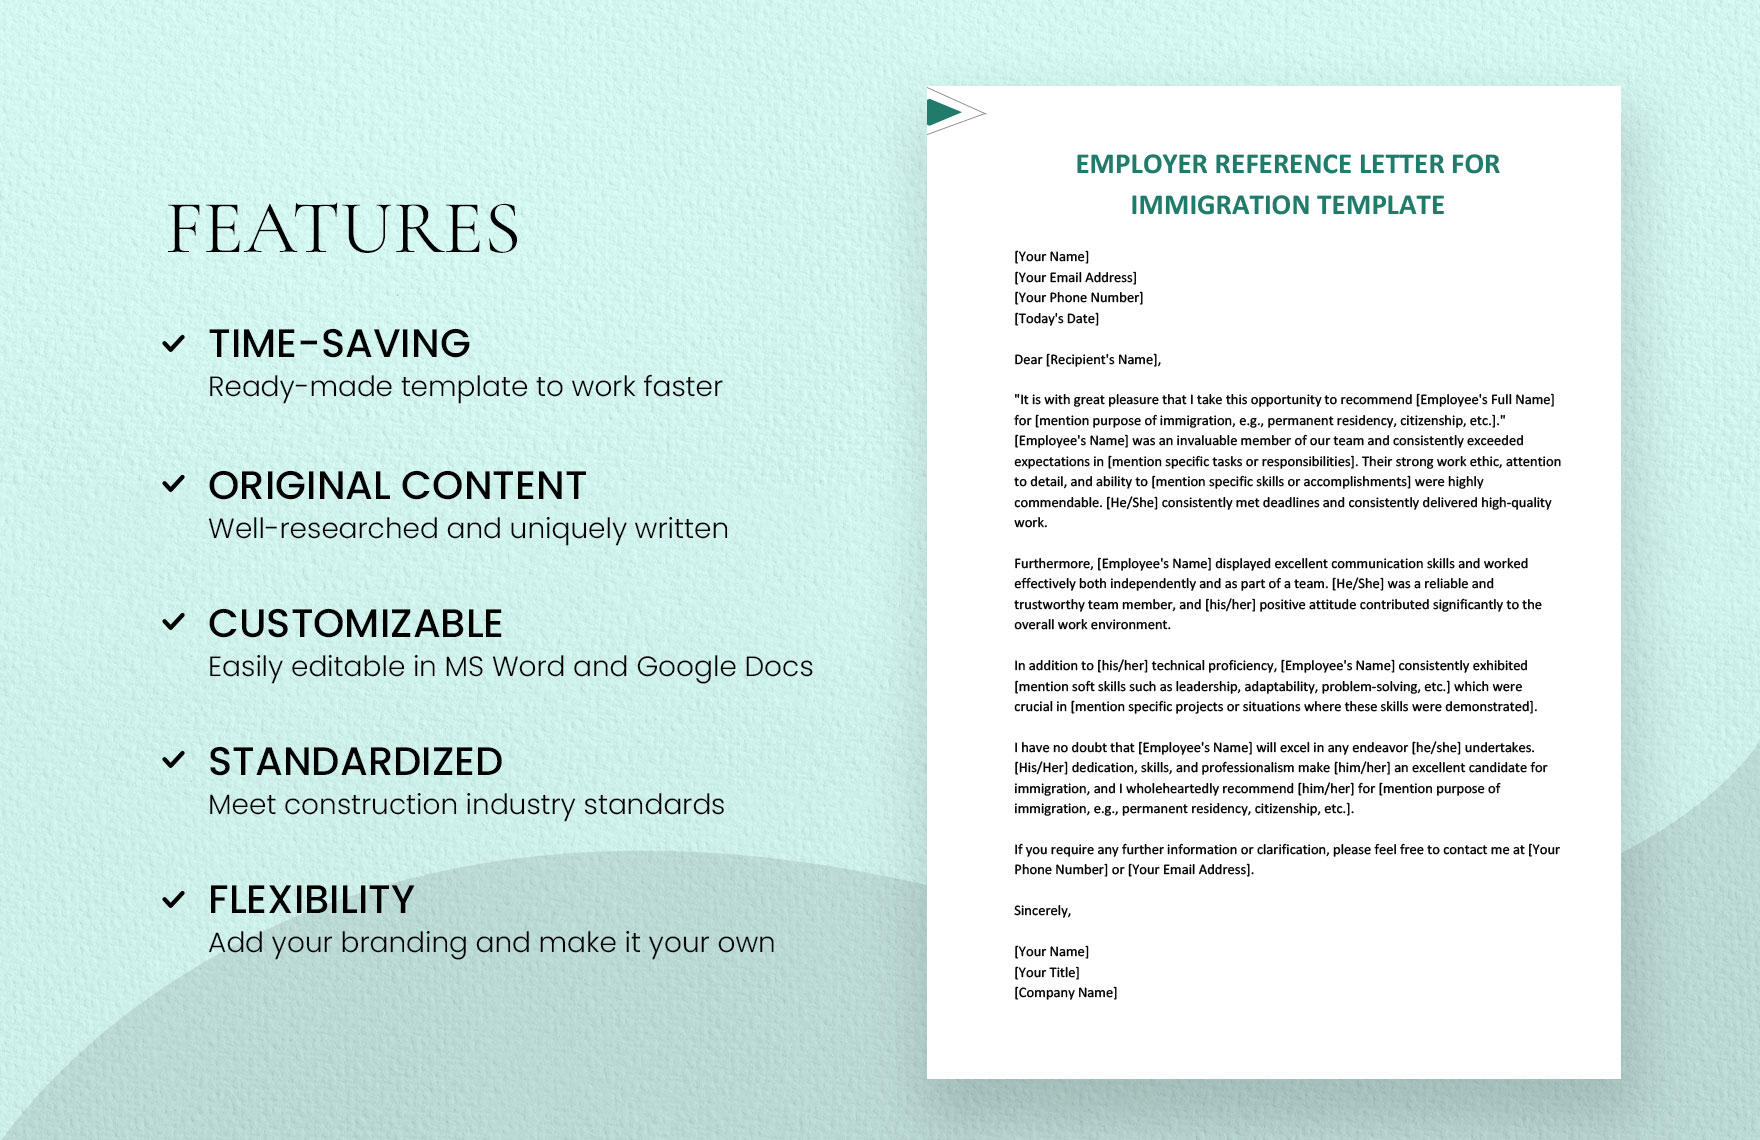 Employer Reference Letter for Immigration Template